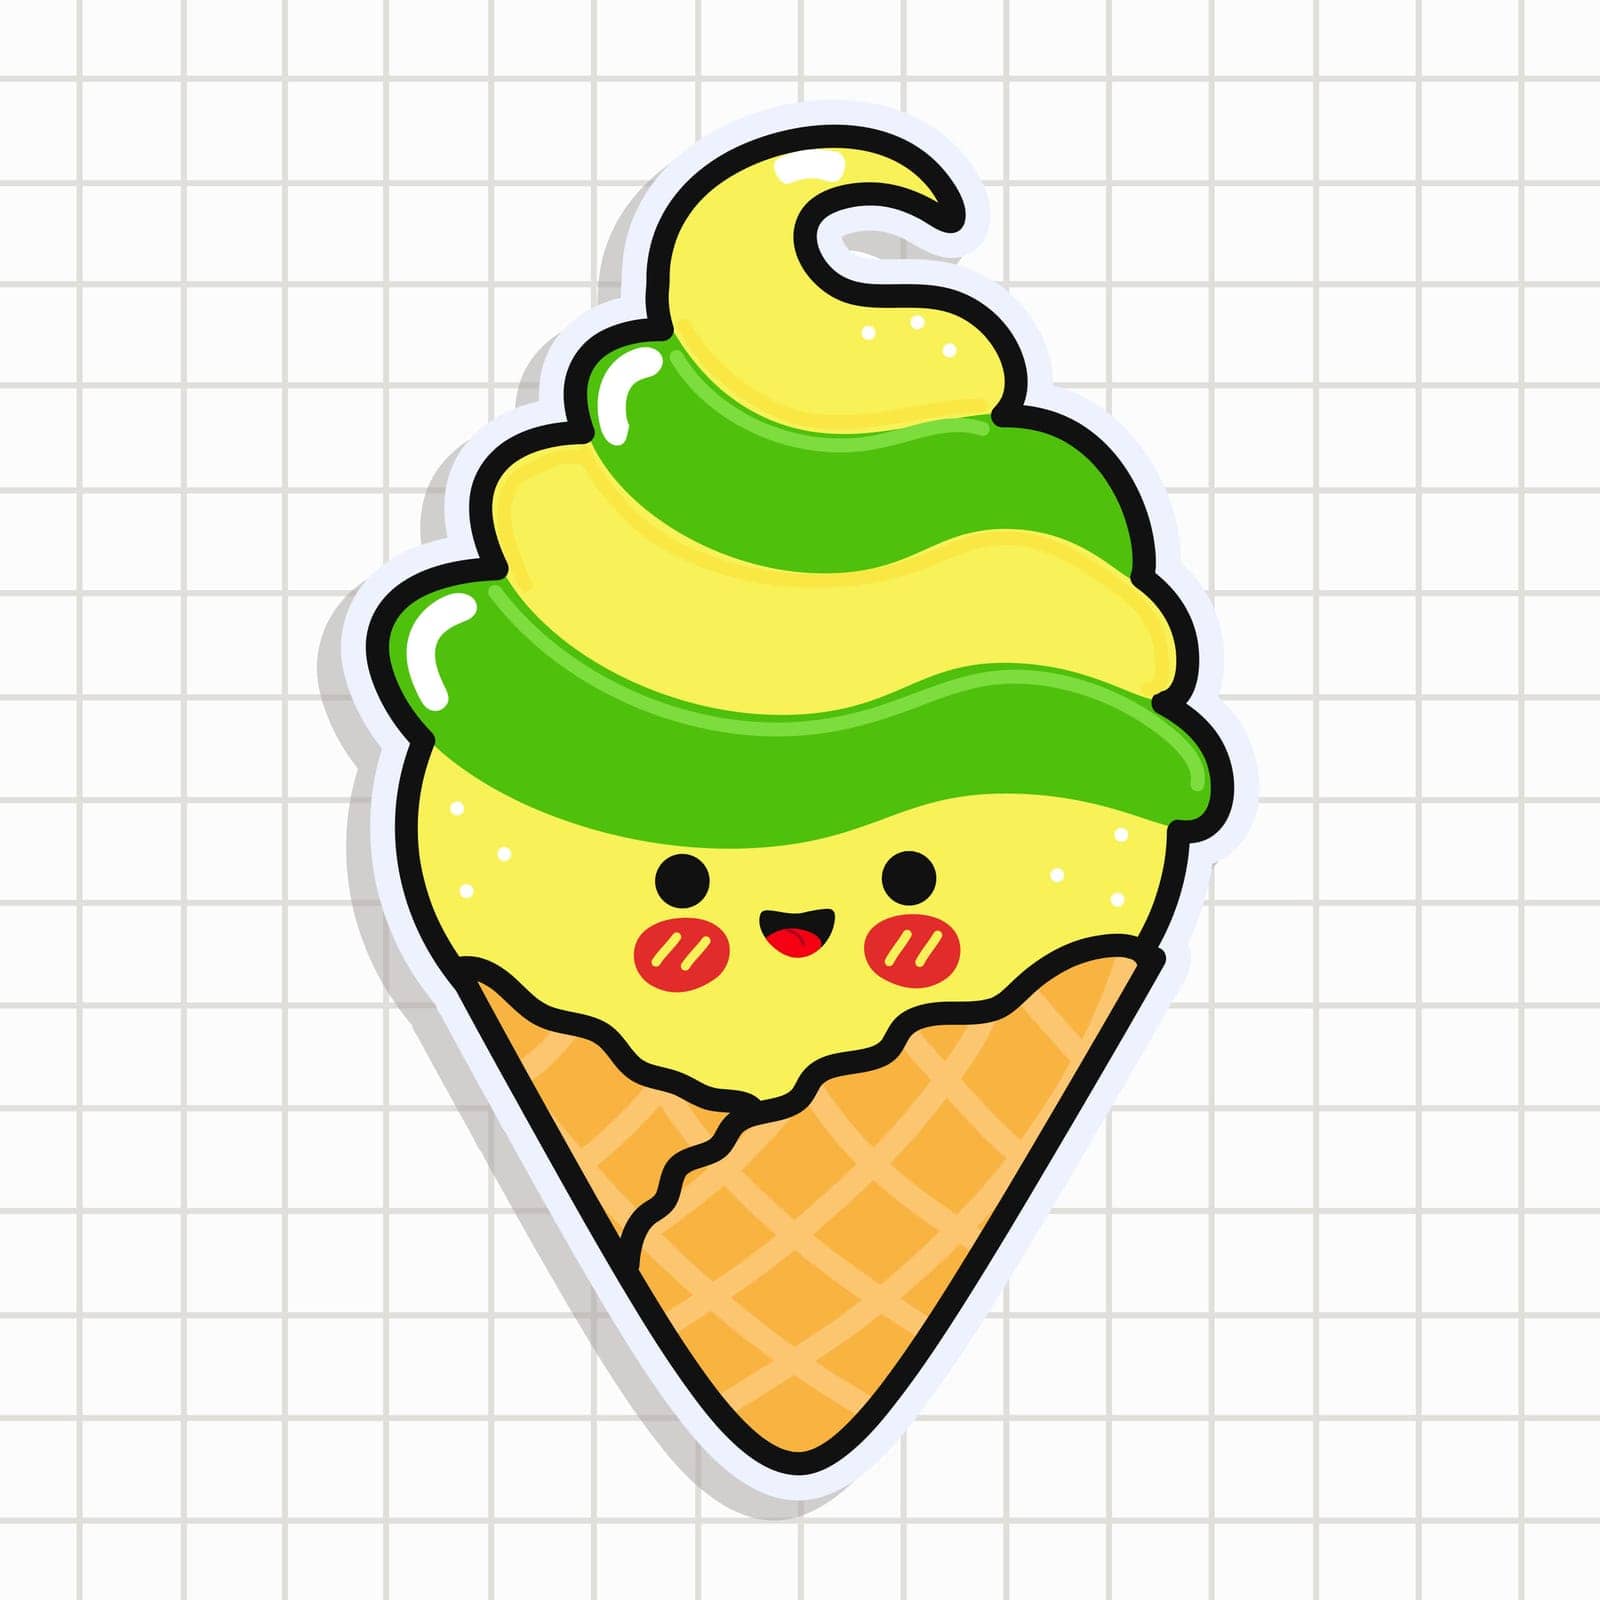 Cute funny Ice cream sticker. Vector hand drawn cartoon kawaii character illustration icon. Isolated on background Ice cream card character concept by Caspian